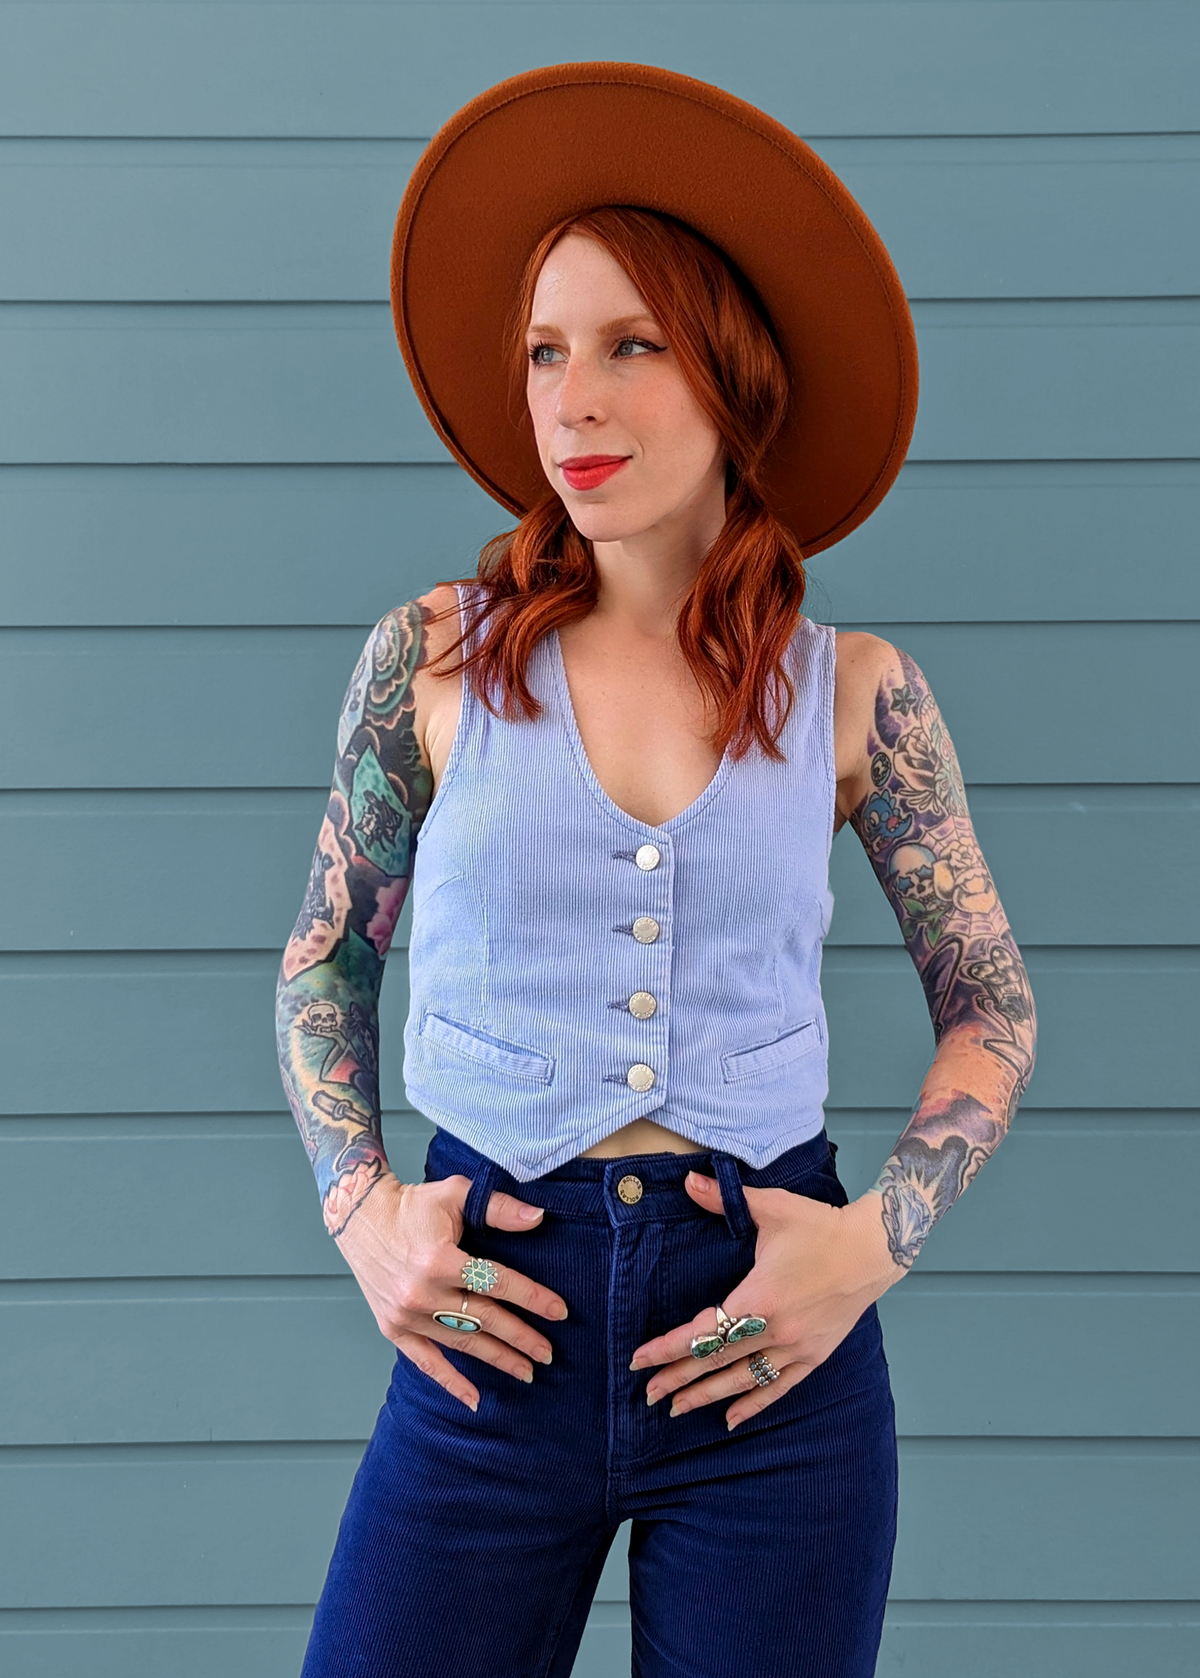 Rolla's Jeans Wisteria Blue Corduroy Dallas Vest. 70s inspired and features a v-neckline, button front, and adjustable buckle at back.